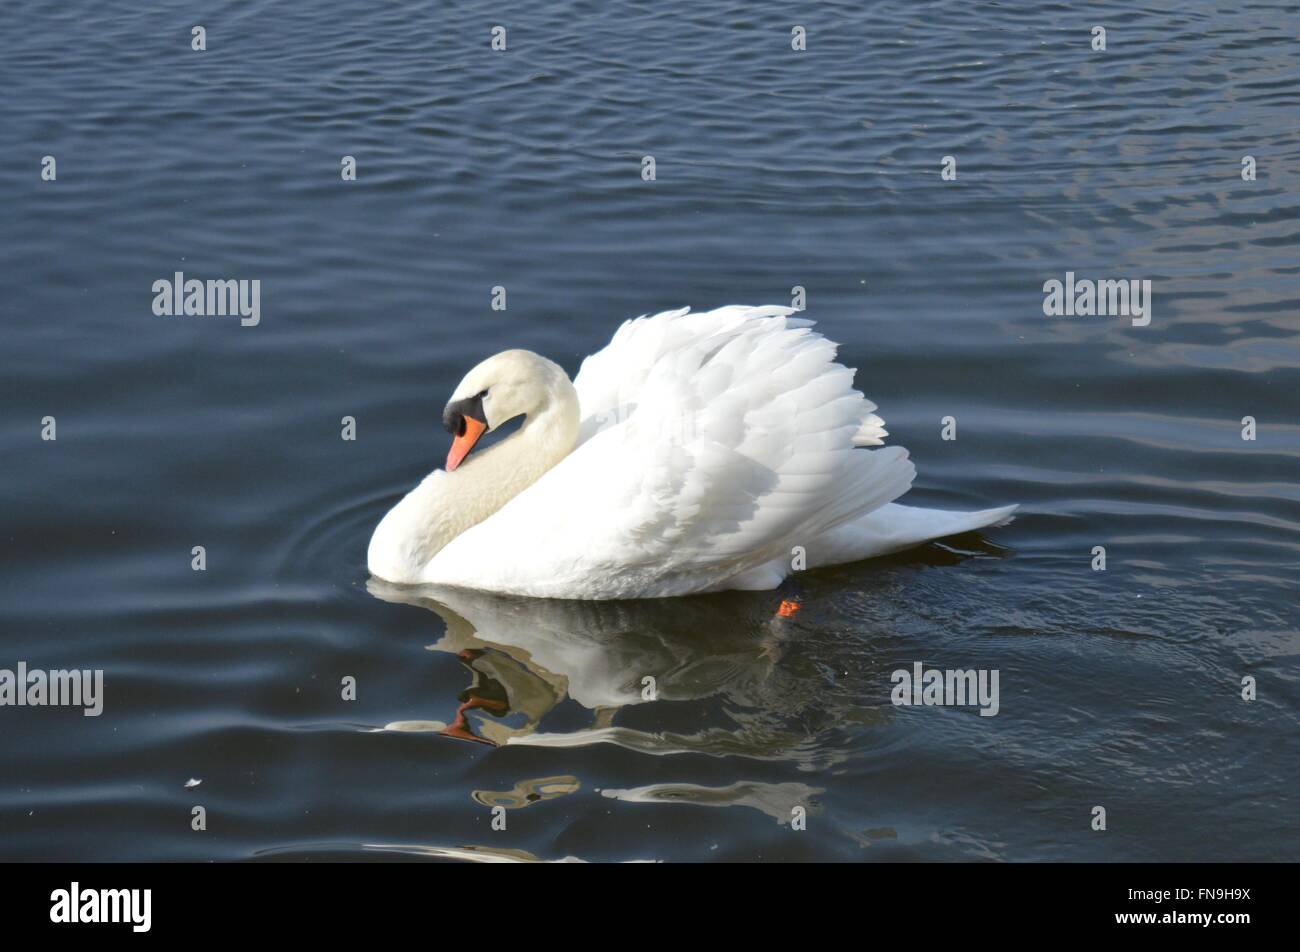 A swan swimming on a lake, feathers and plumage magnificent. Stock Photo